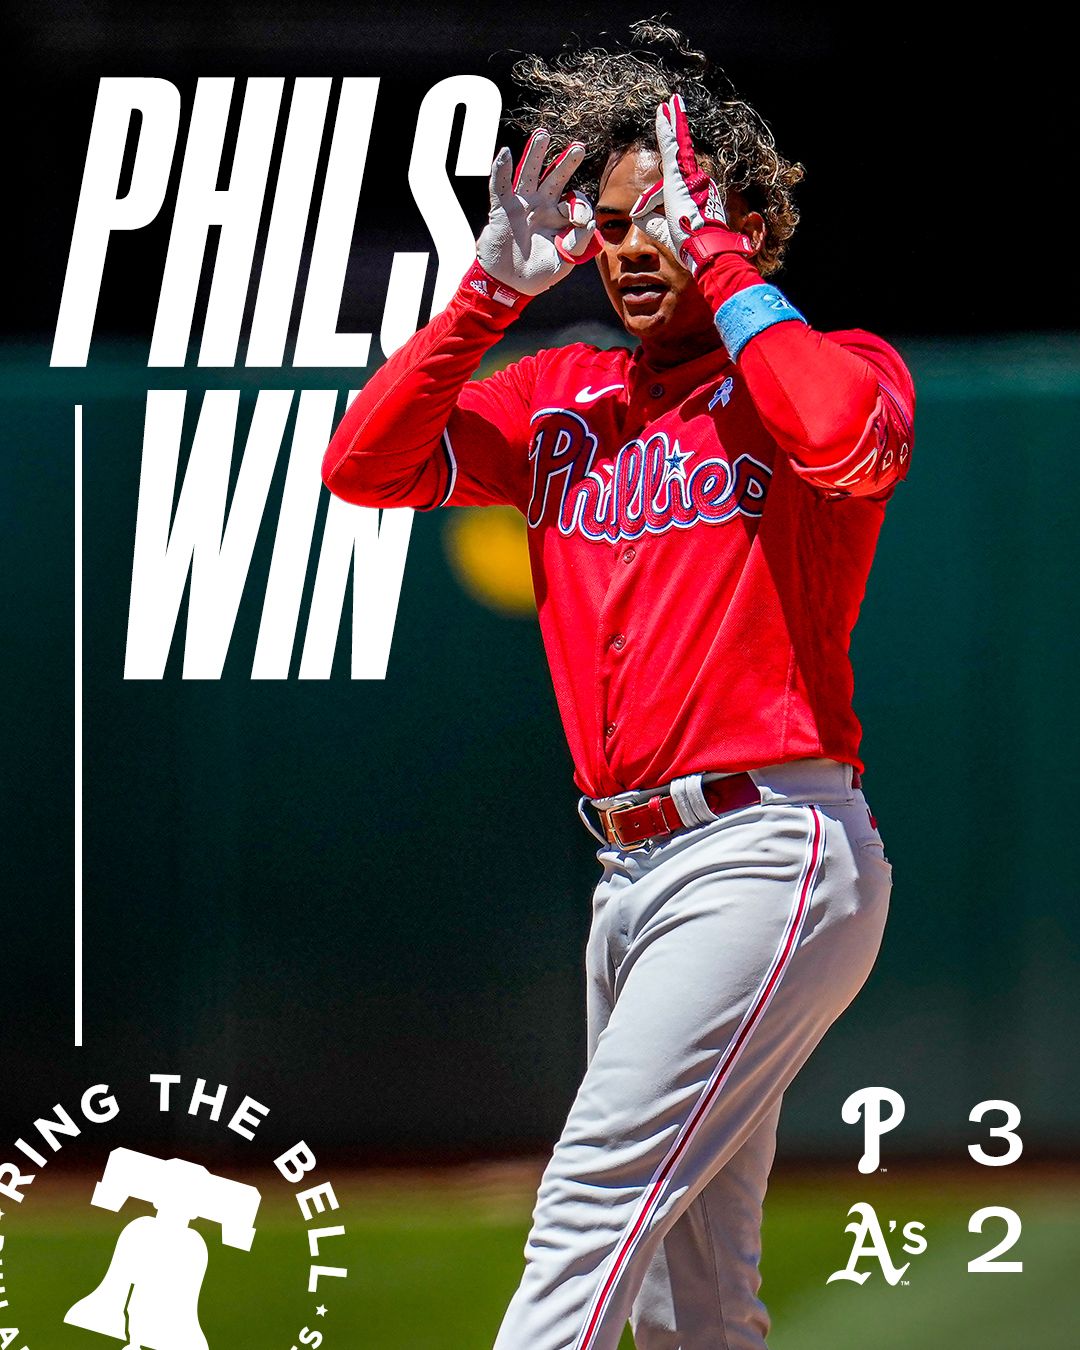 phillies ring the bell wallpaper